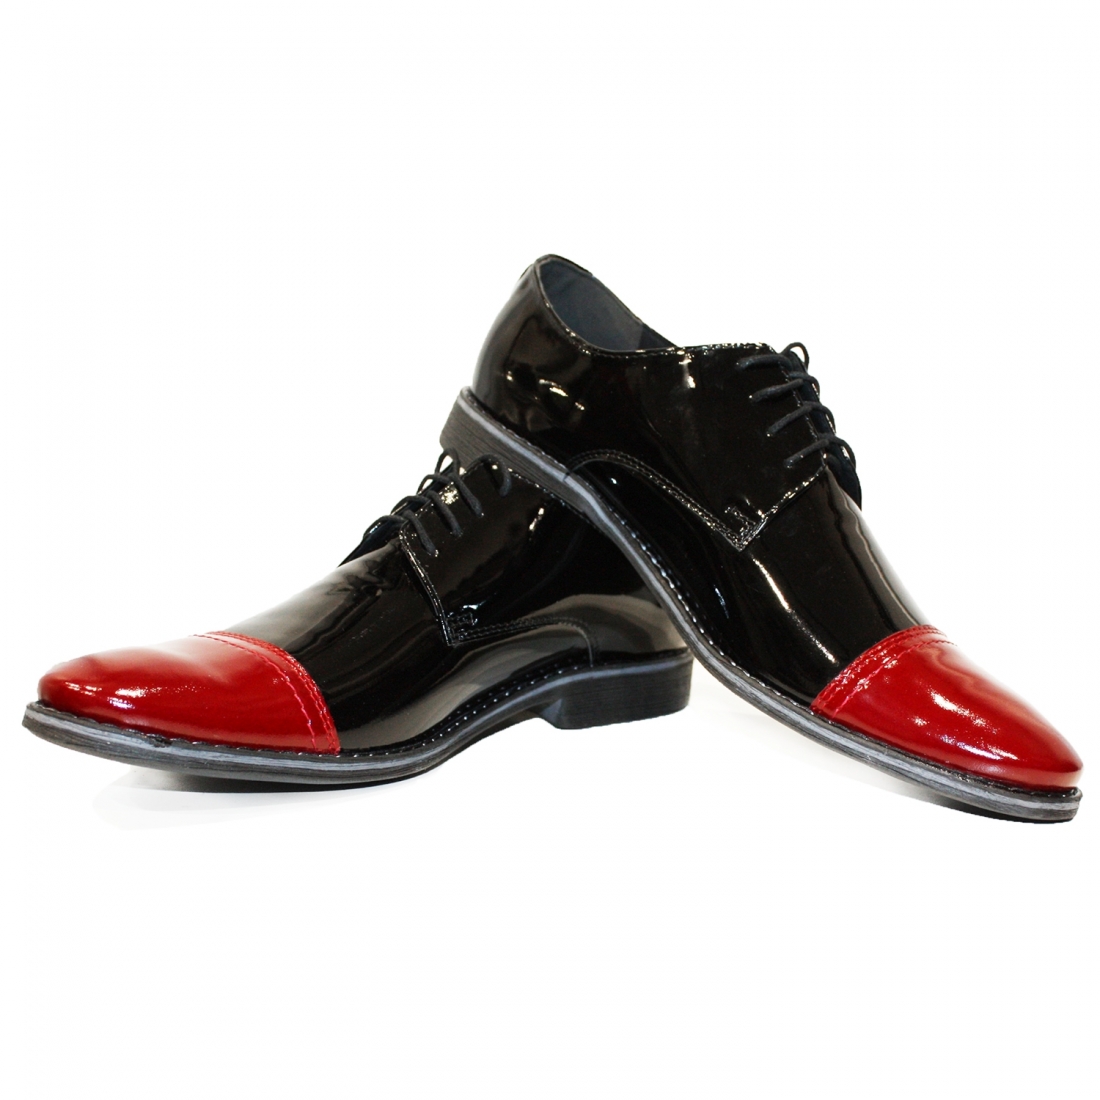 Modello Tchuberro - Chaussure Classique - Handmade Colorful Italian Leather Shoes